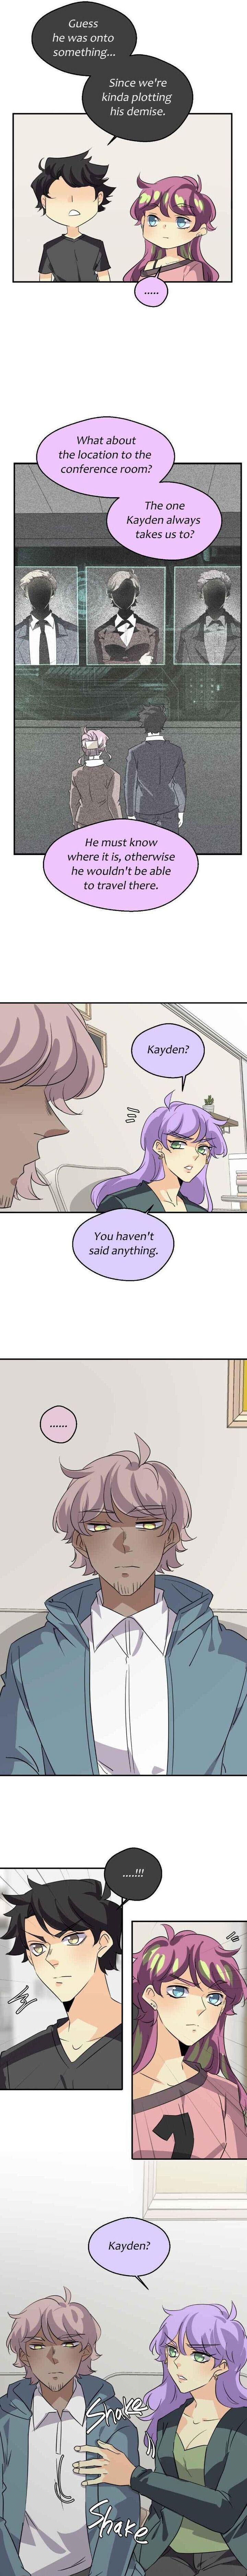 Unordinary Chapter 319 Page 3